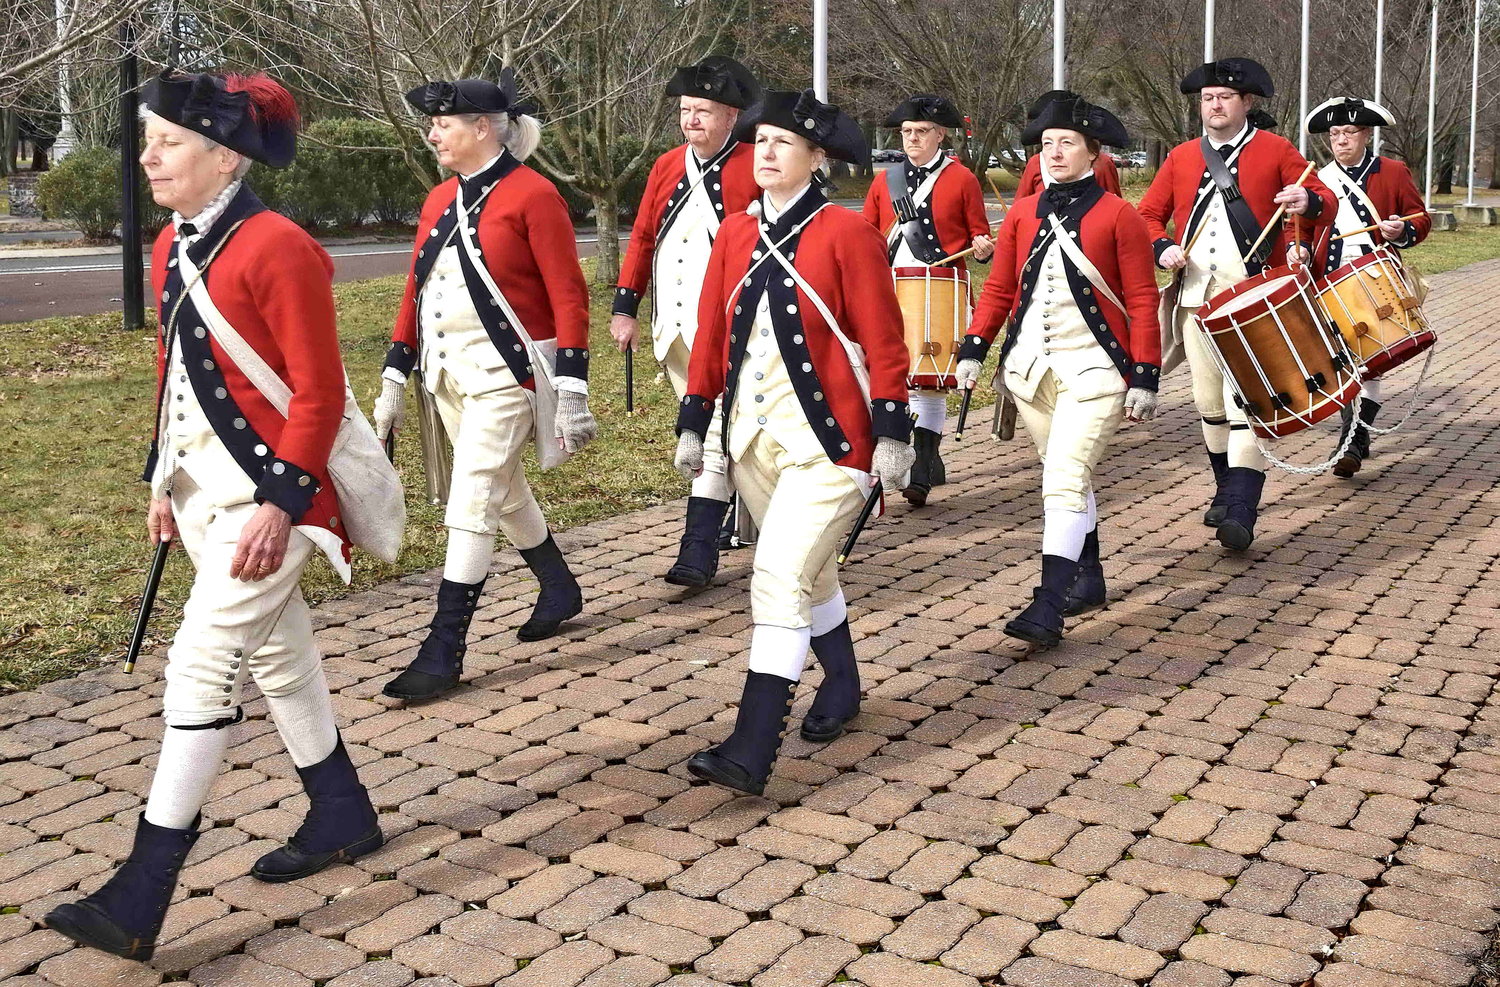 Members of park’s Fife and Drum Corps march.